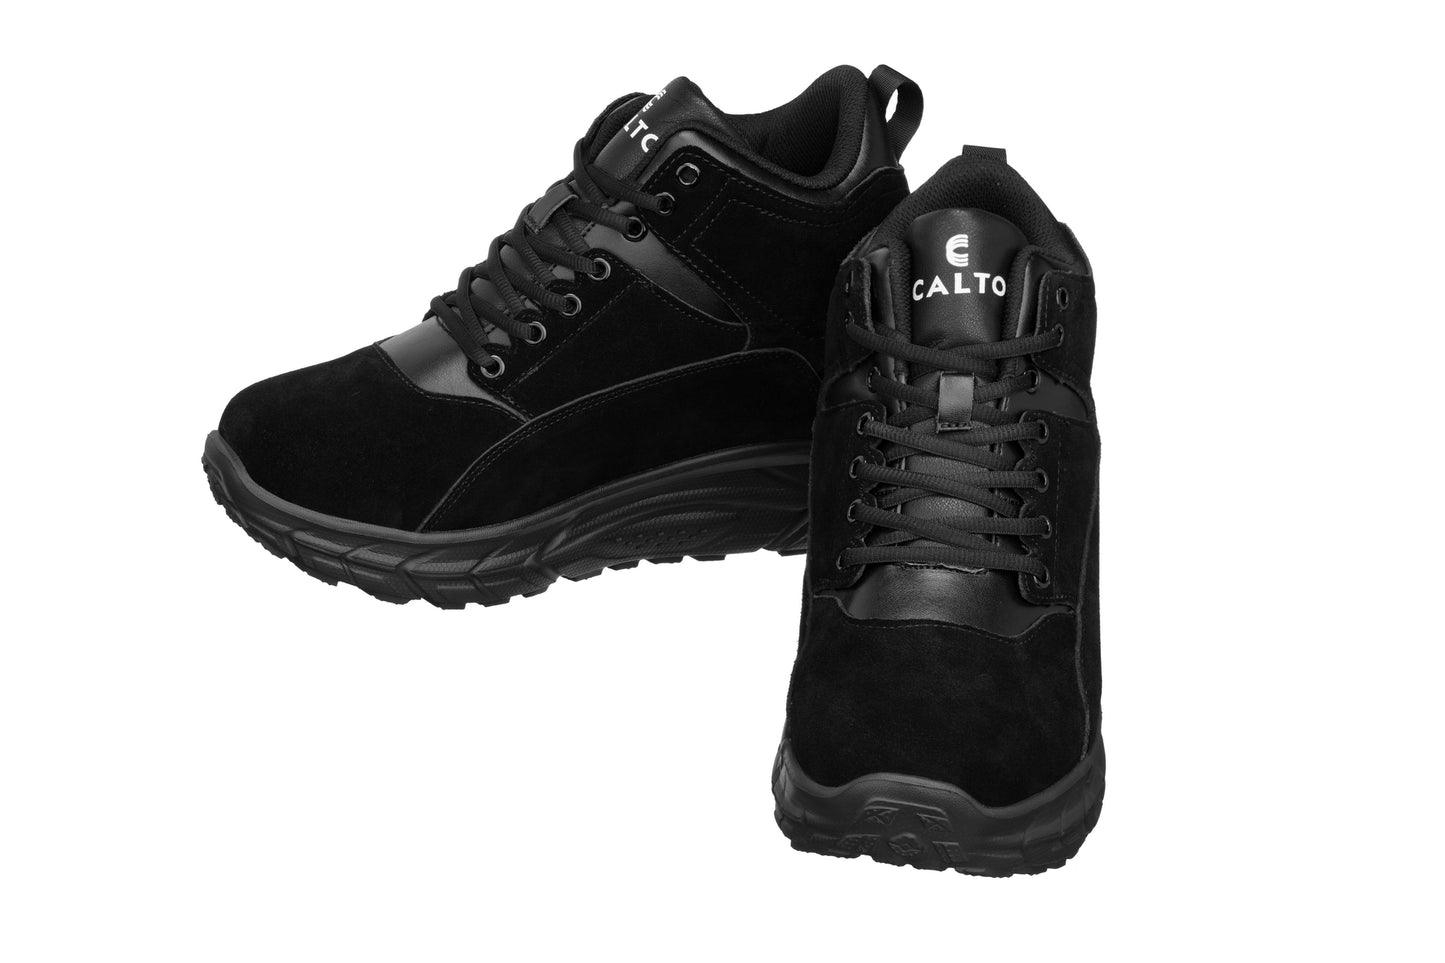 Elevator shoes height increase CALTO - S22801 - 4 Inches Taller (Black) - Hiking Style Boots